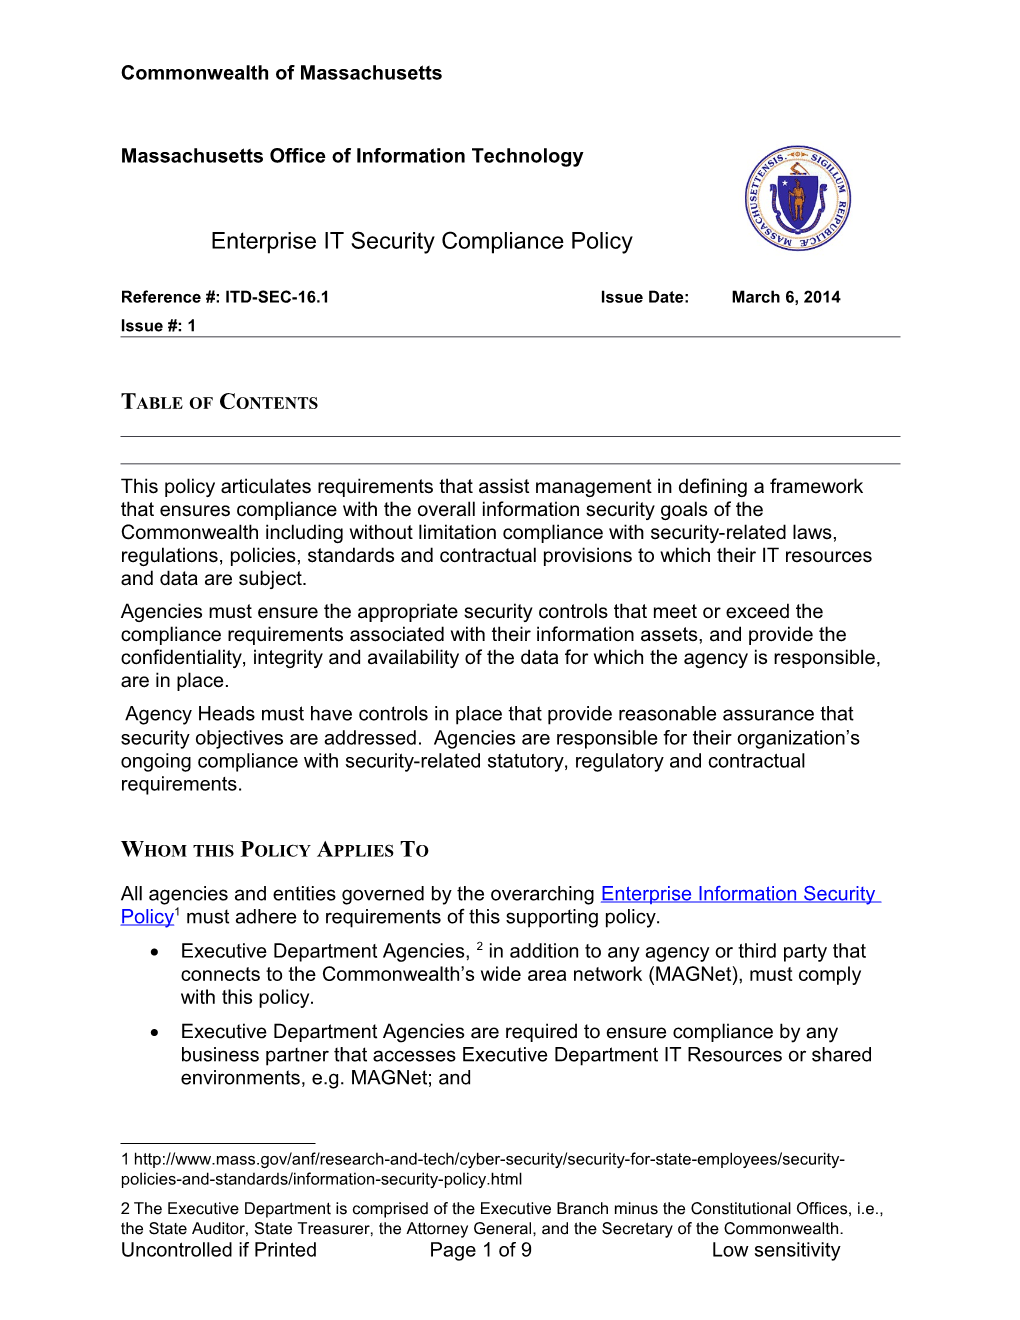 Enterprise IT Security Compliance Policy